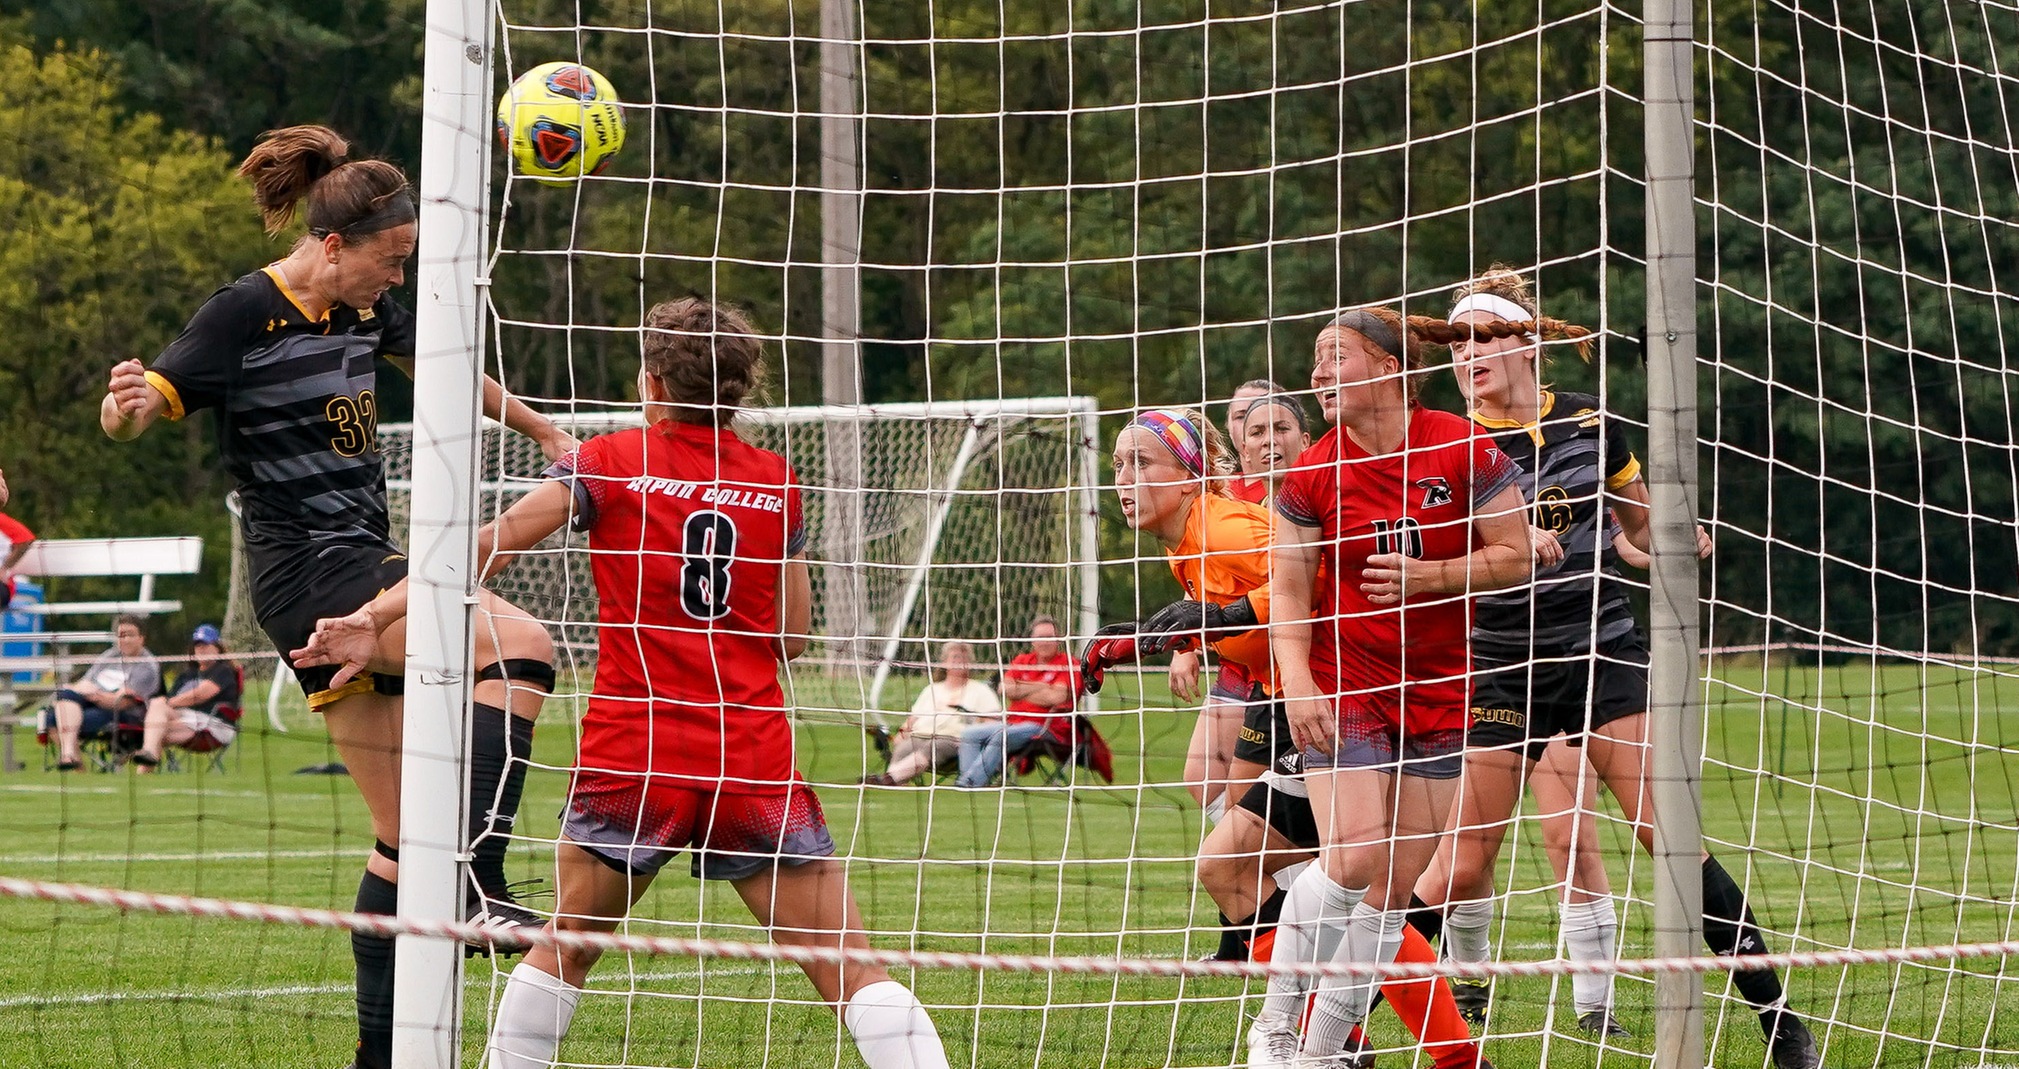 Mackenzie Bennett's header in the 13th minute tied the score between the Titans and Red Hawks at 2.